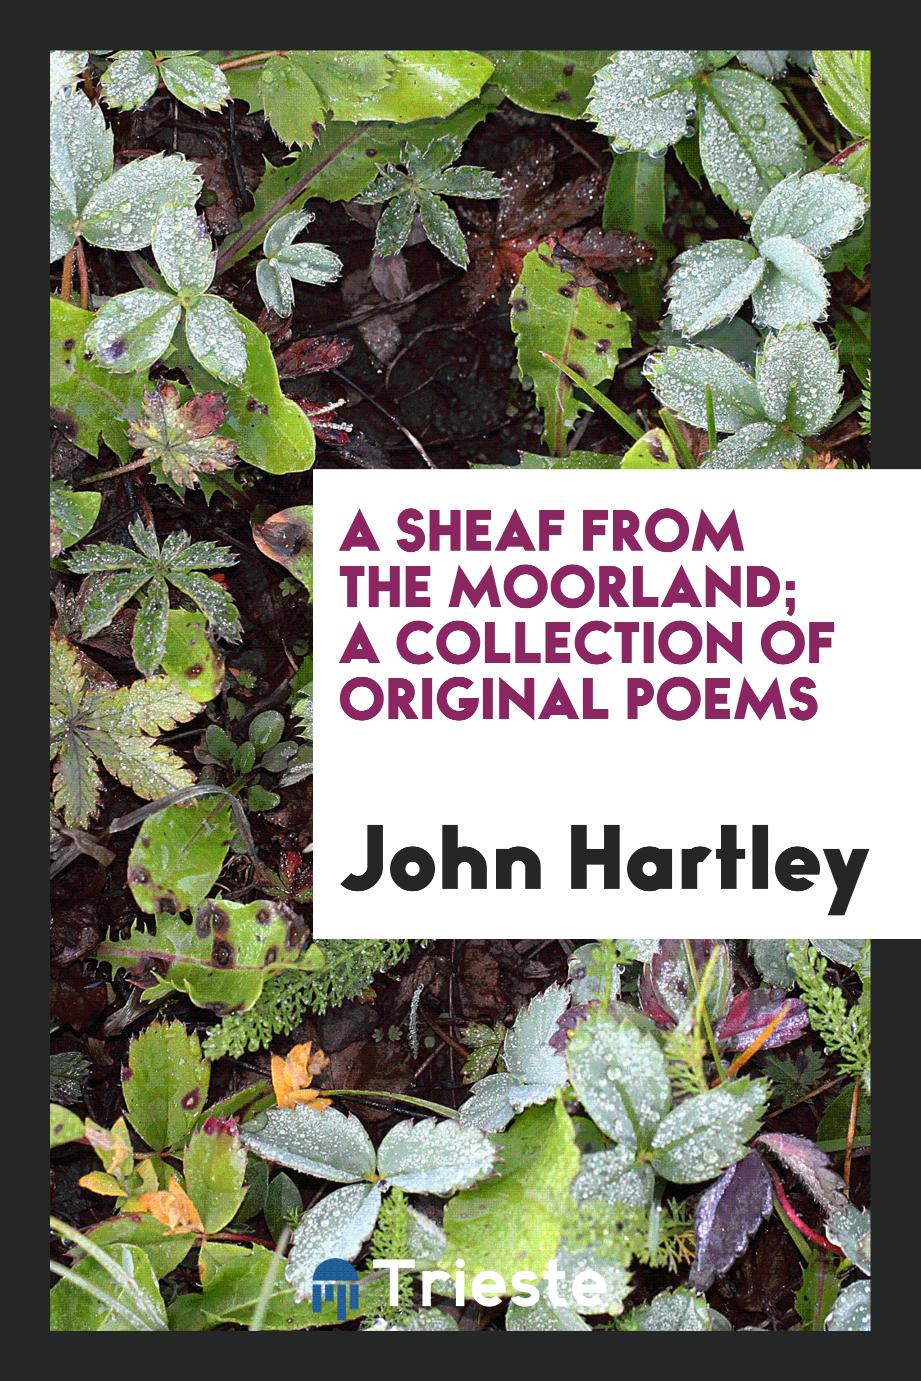 A sheaf from the moorland; a collection of original poems